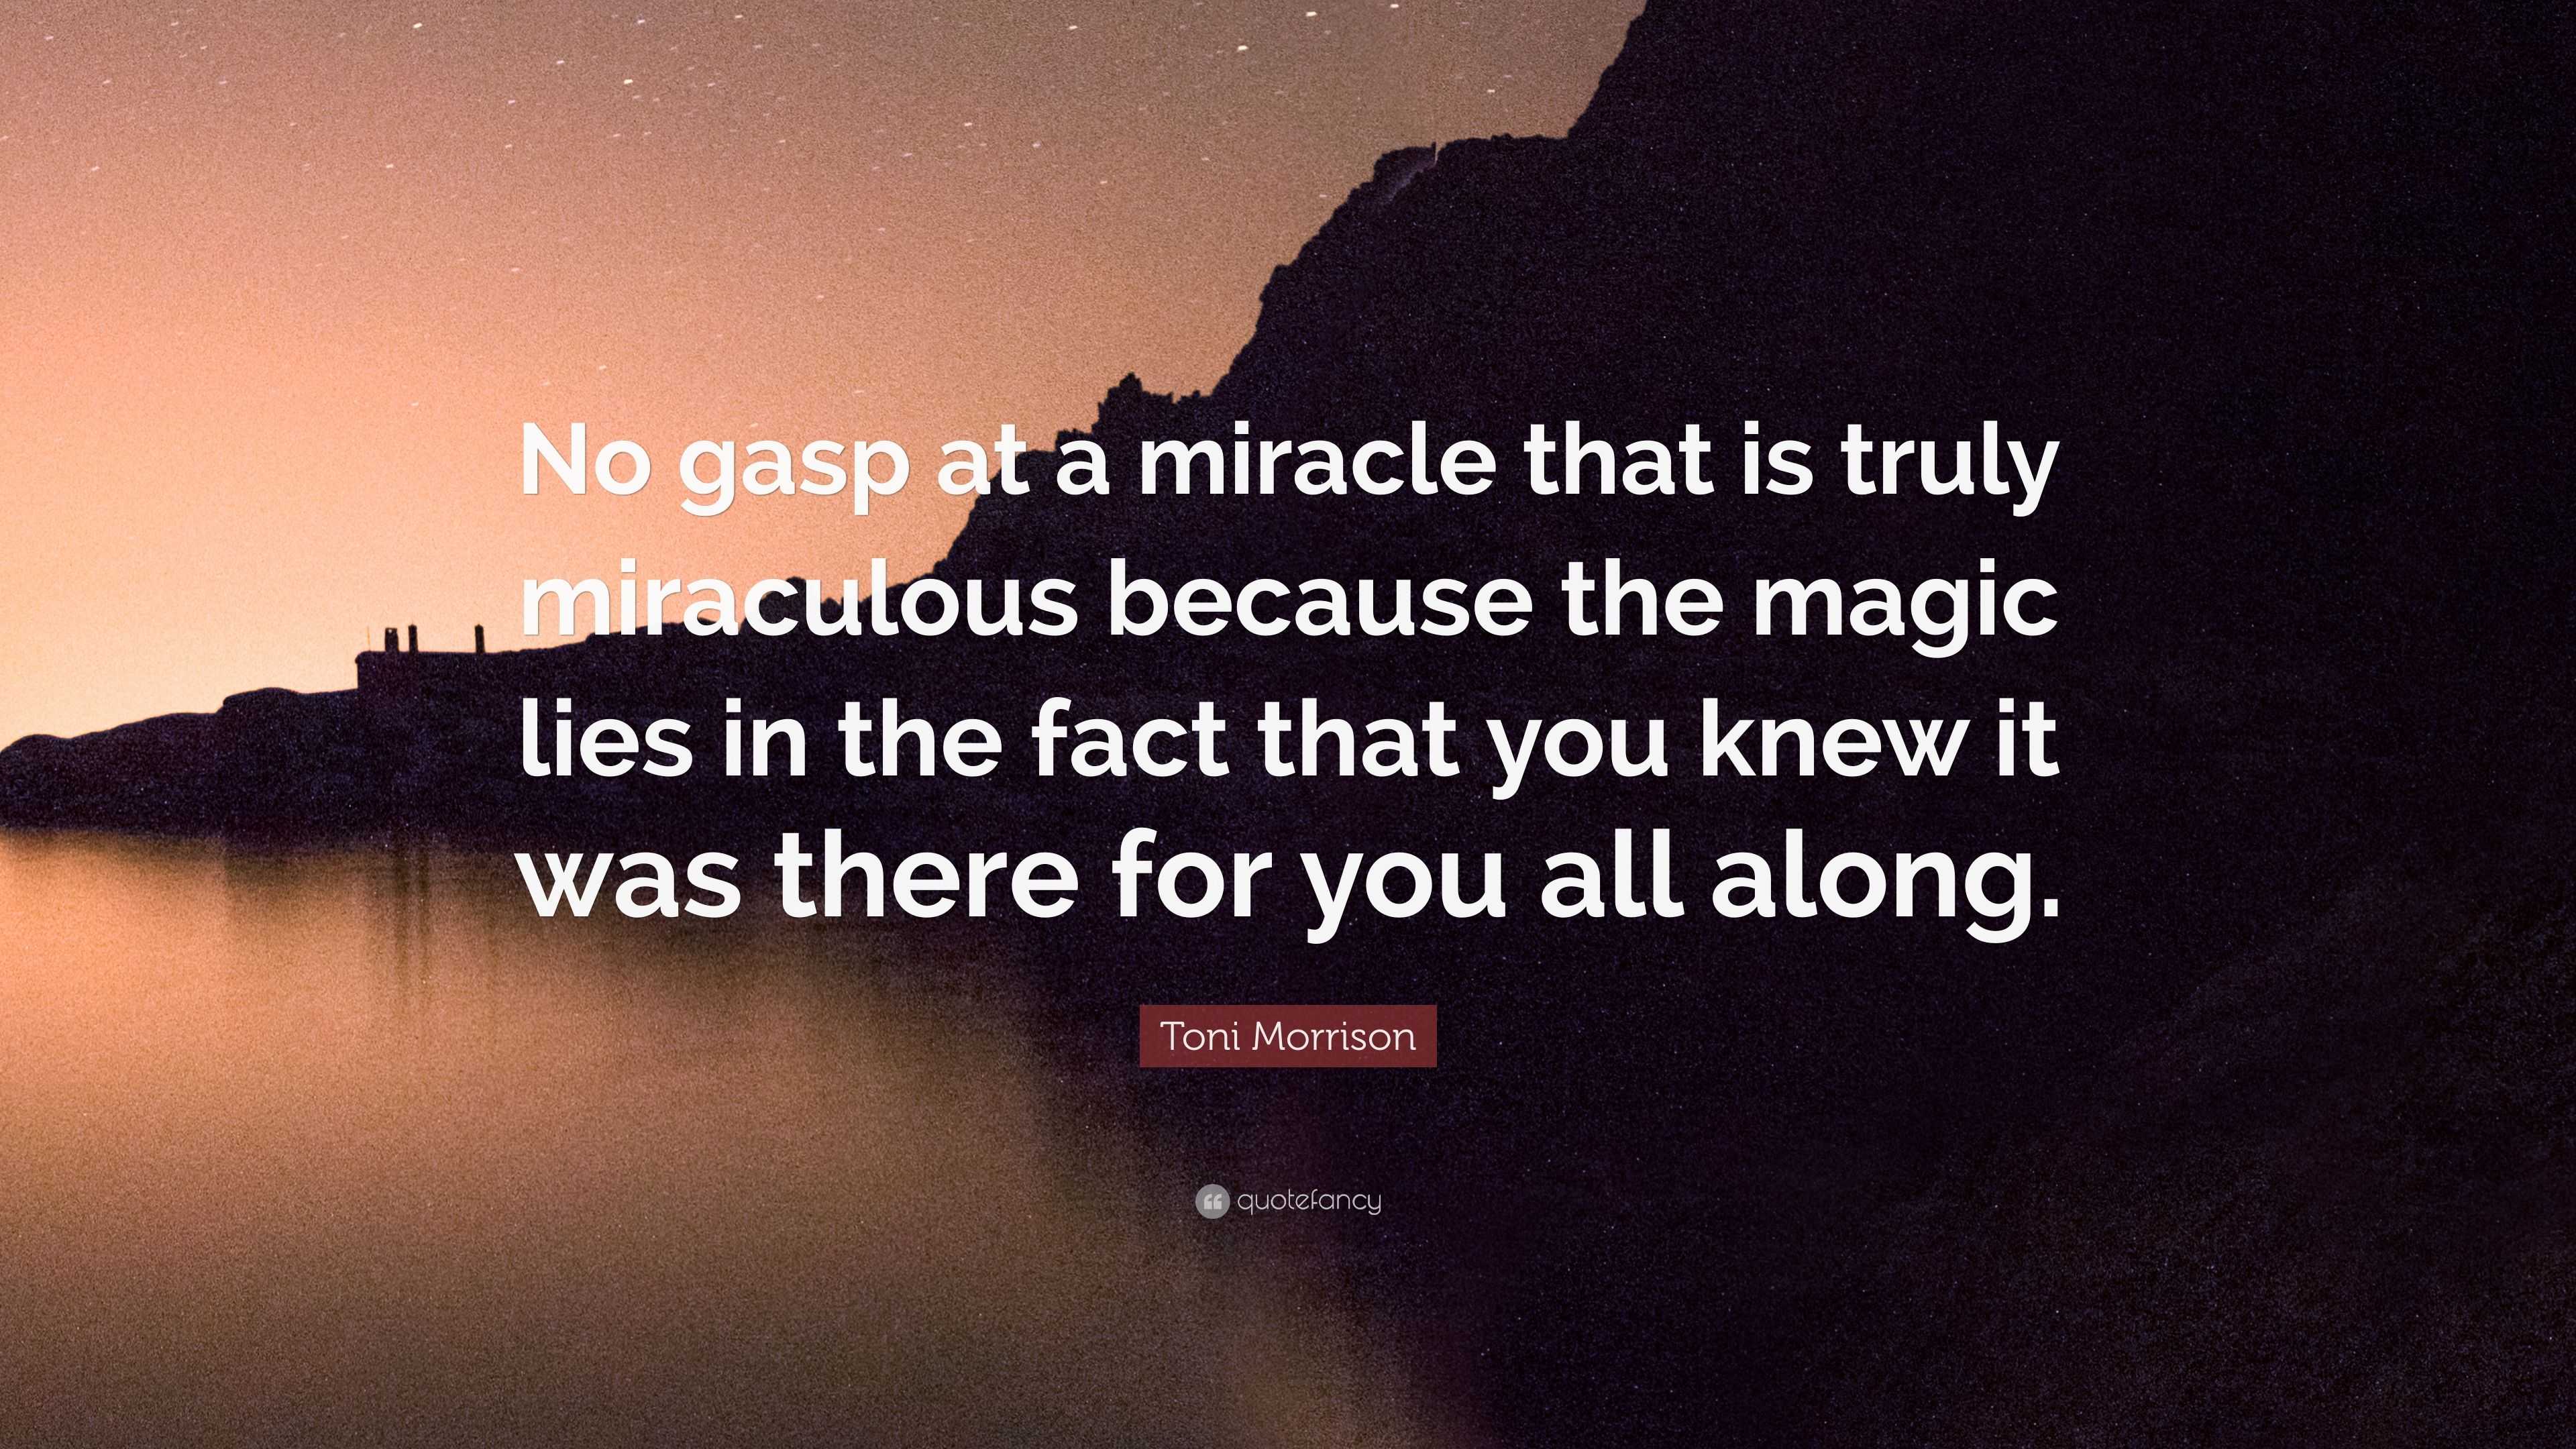 Toni Morrison Quote: “No gasp at a miracle that is truly miraculous ...